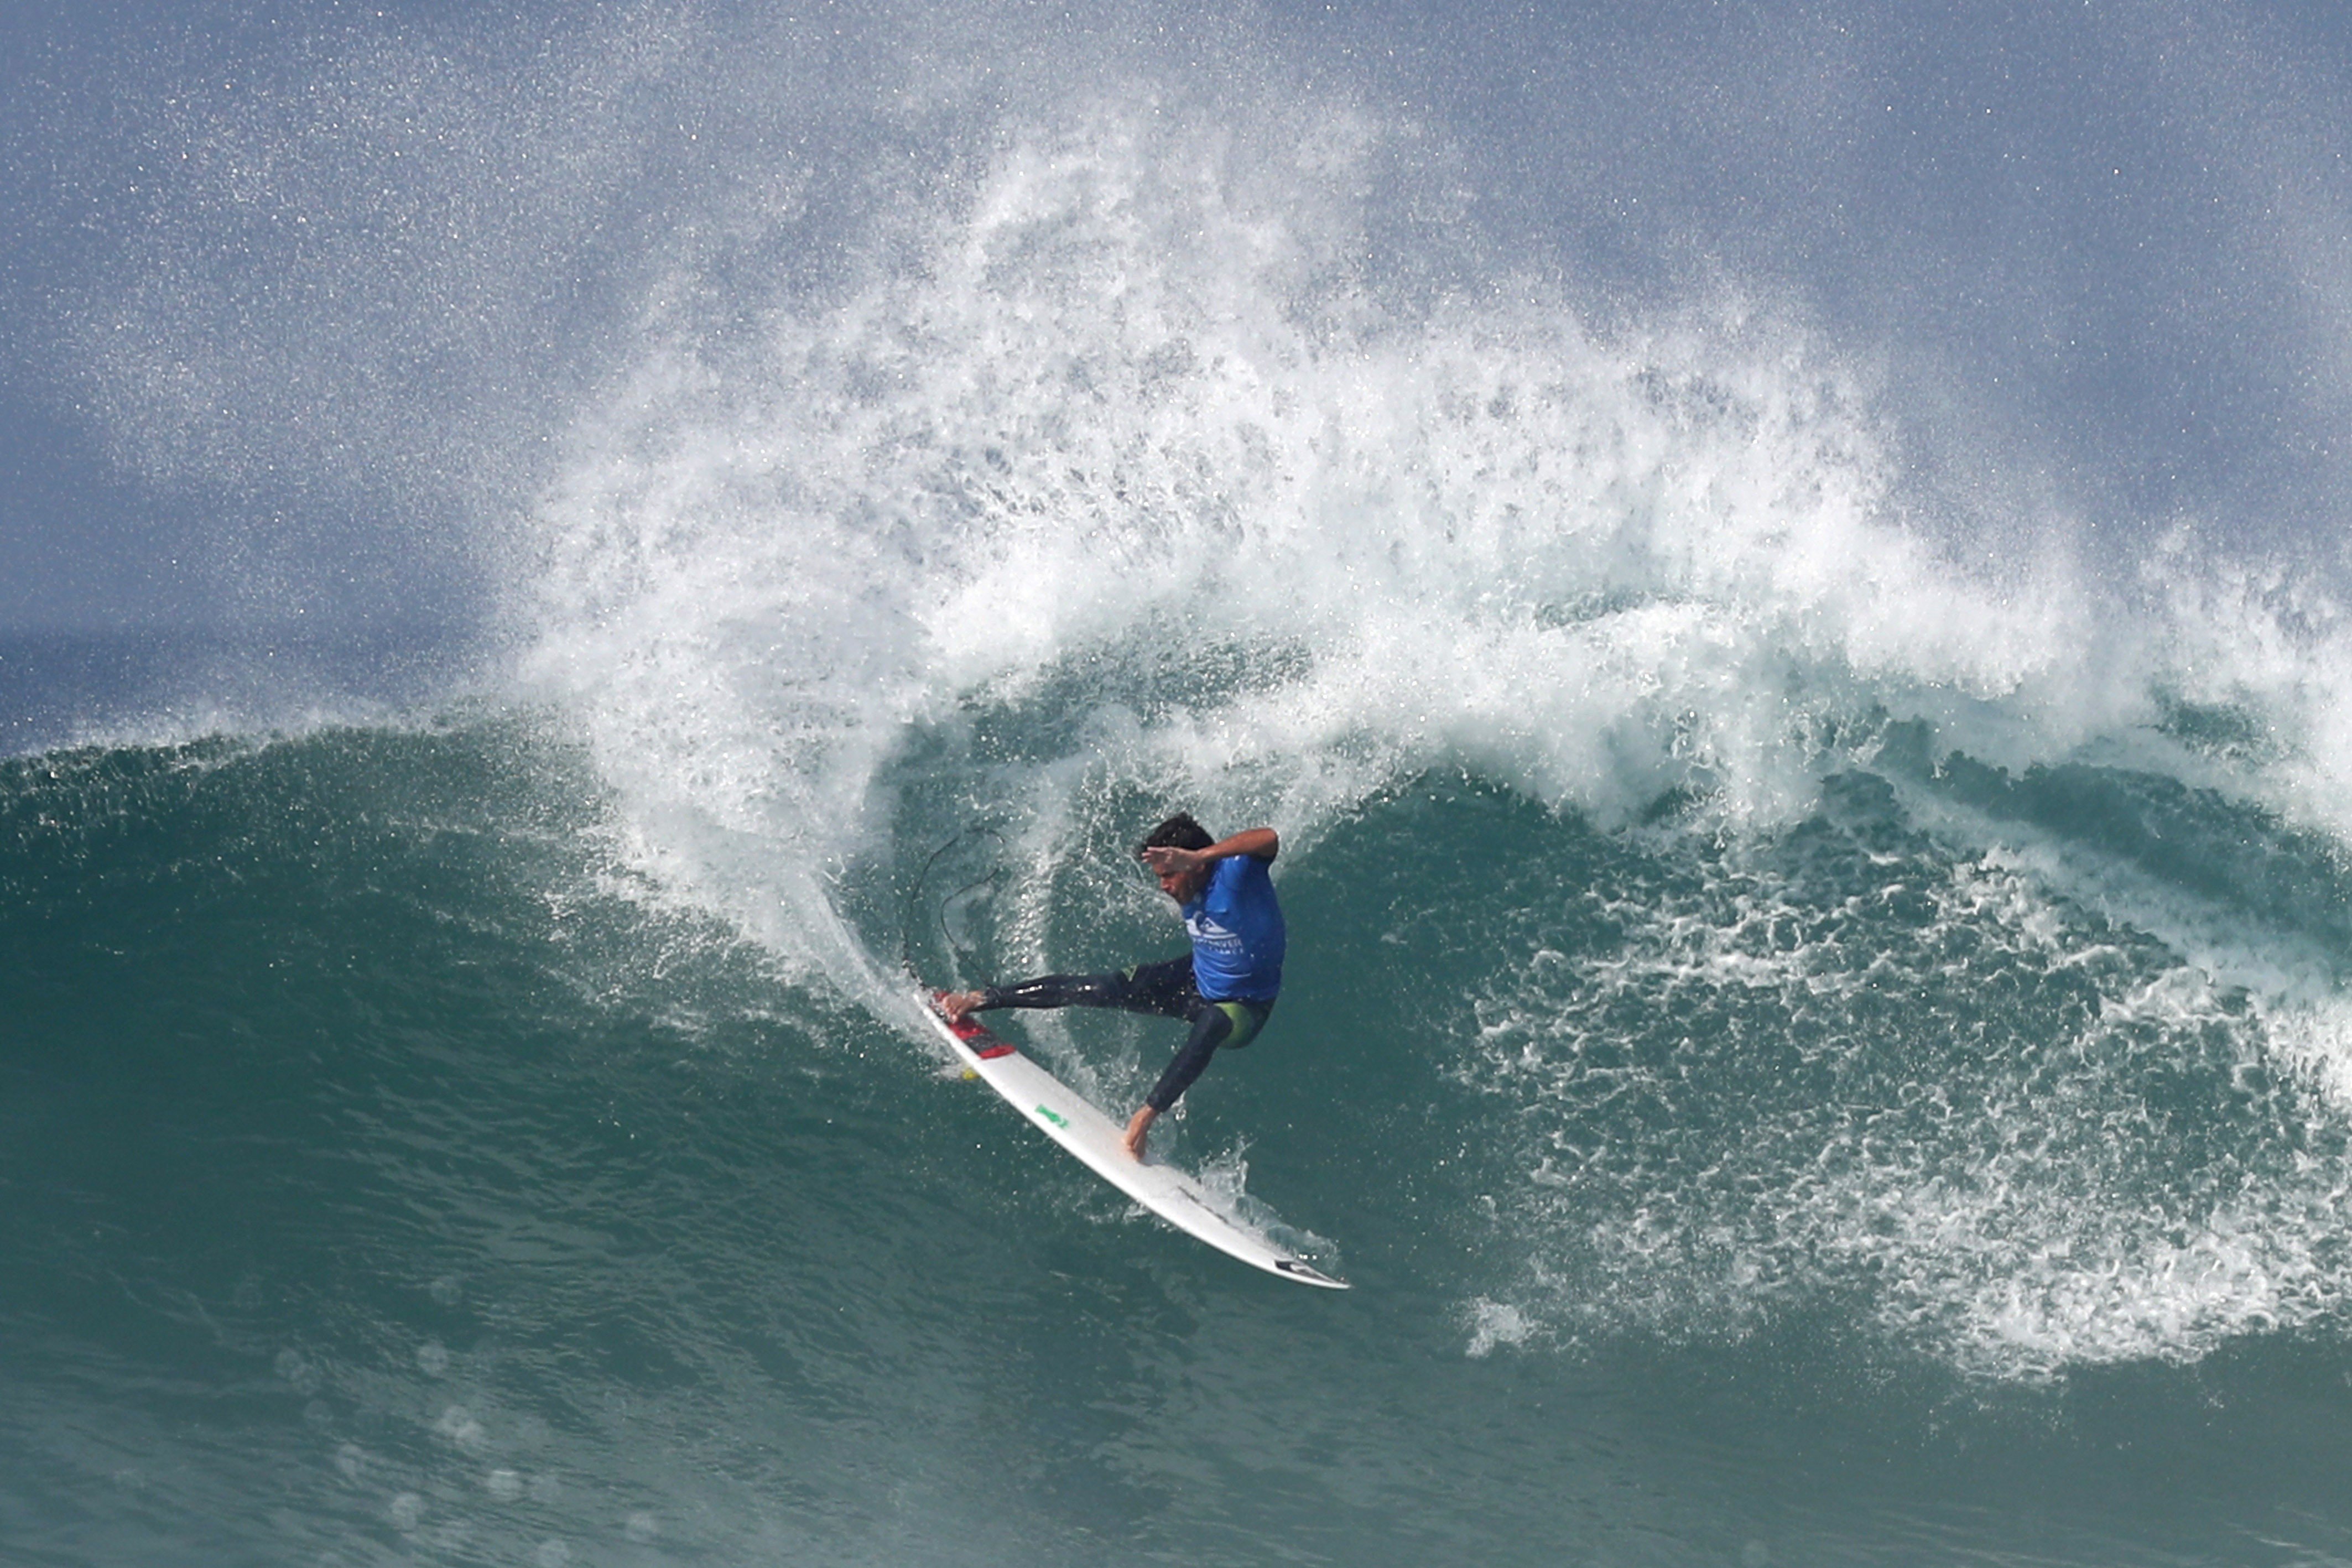 France’s Jeremy Flores competes during the World Surfing League Quicksilver Pro France in Hossegor, France. Photo: DPPI